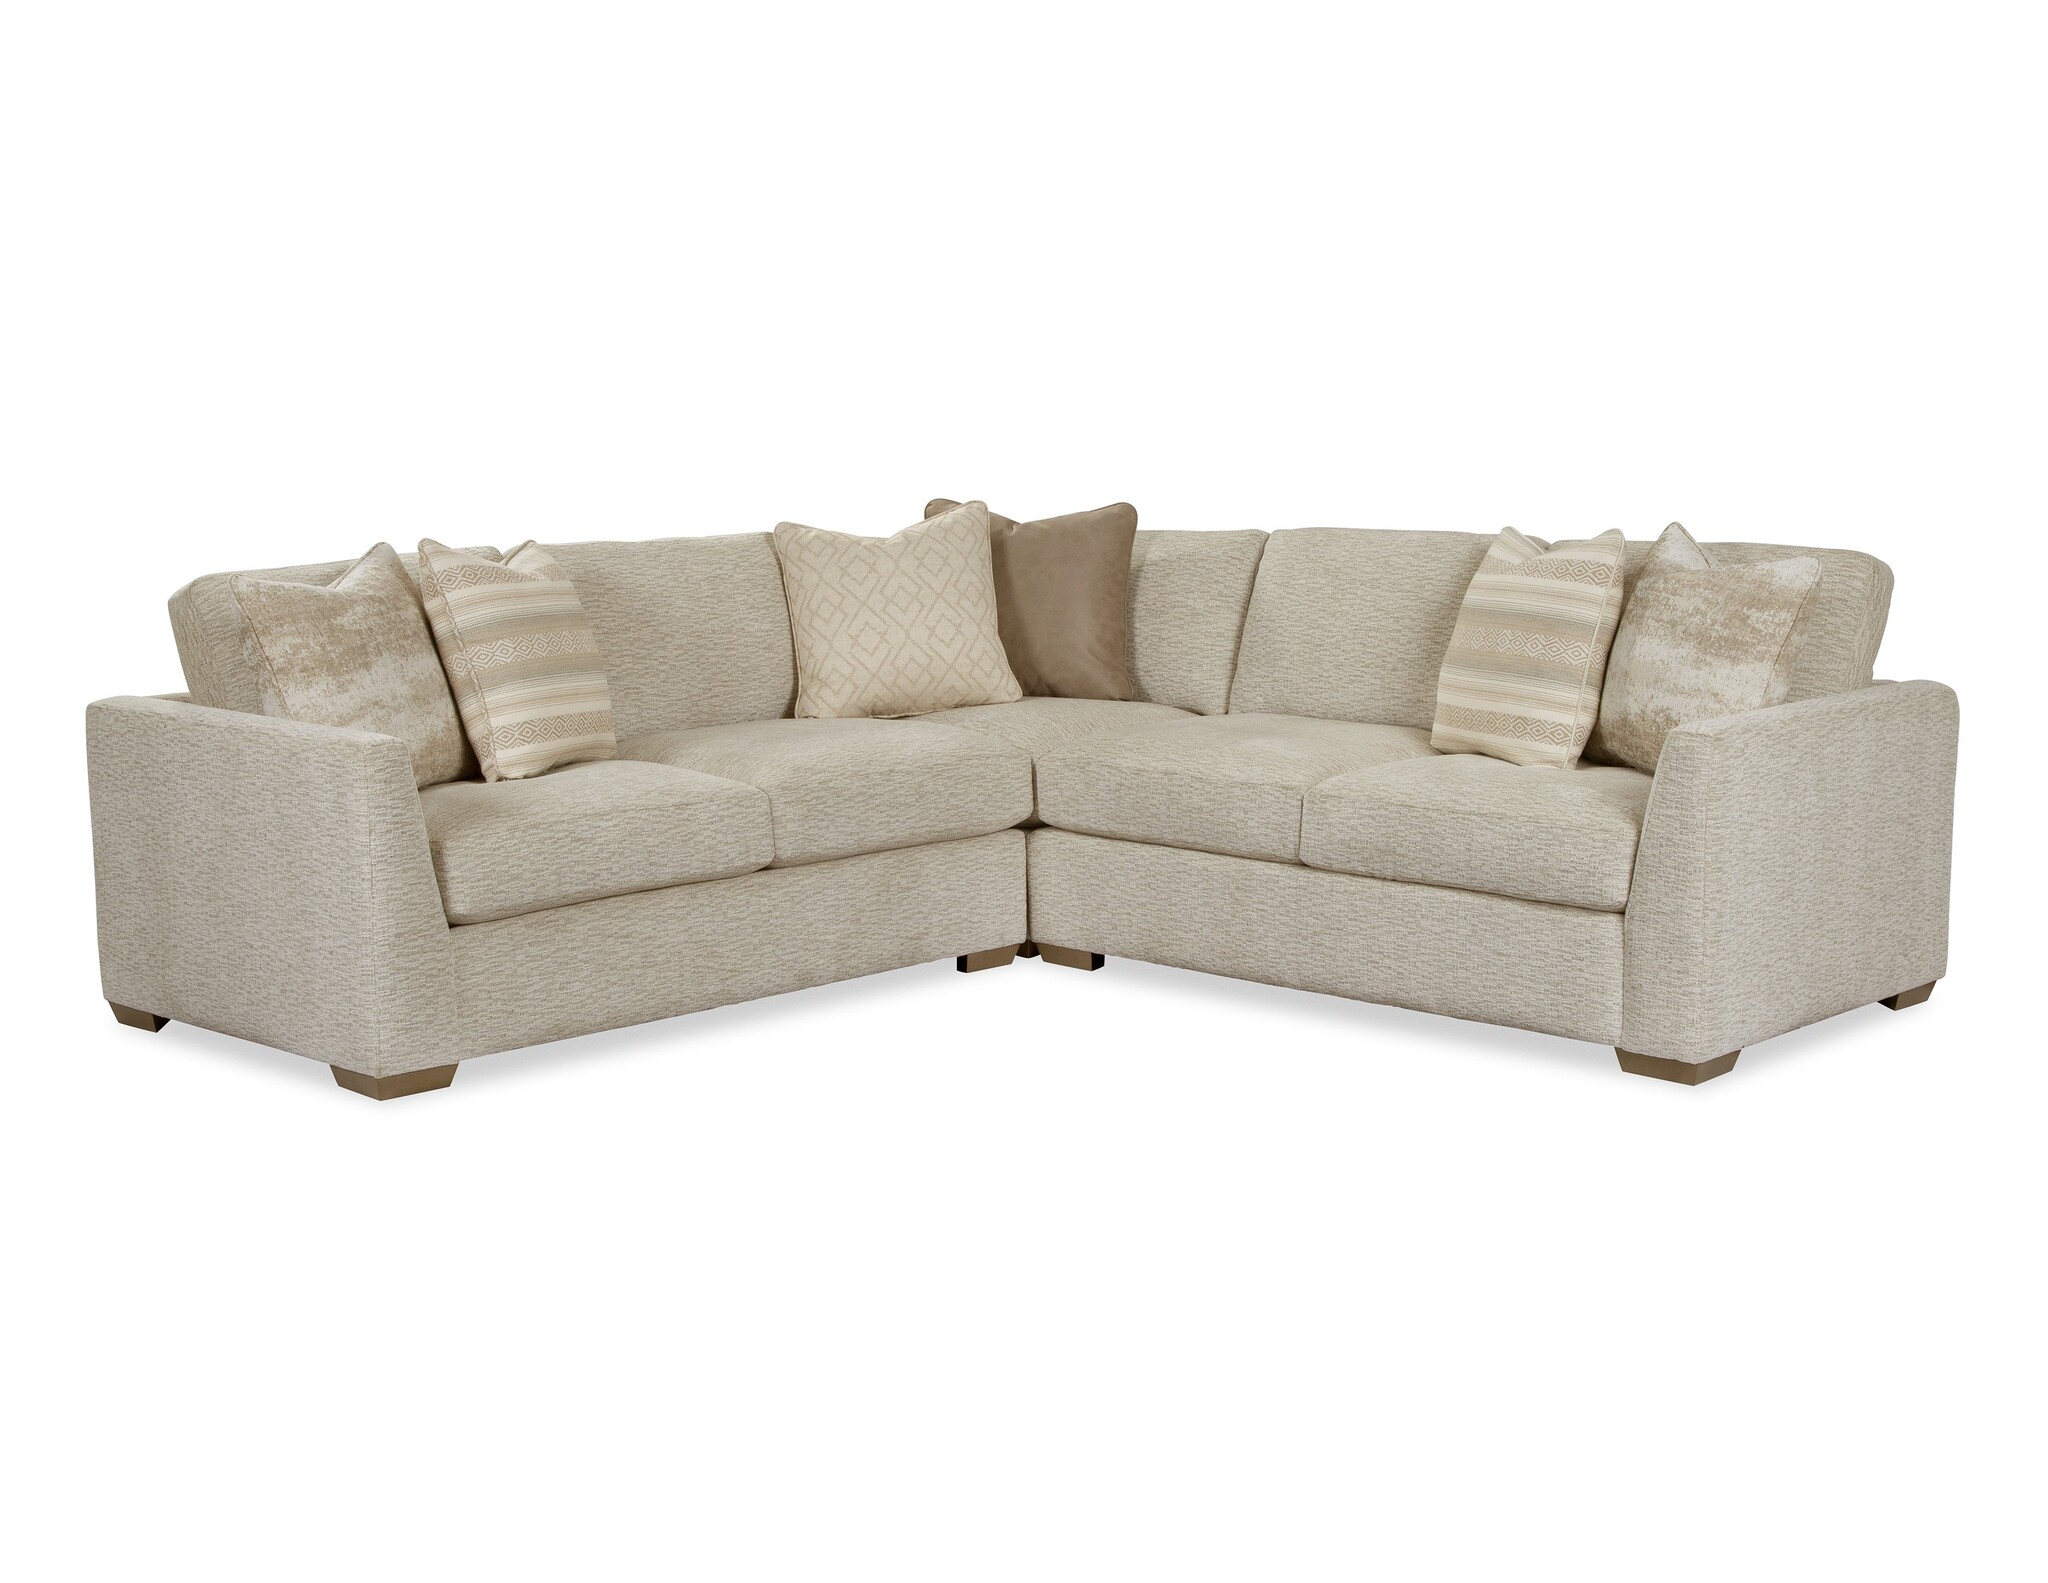 Craftmaster Furniture 7839 Sectional